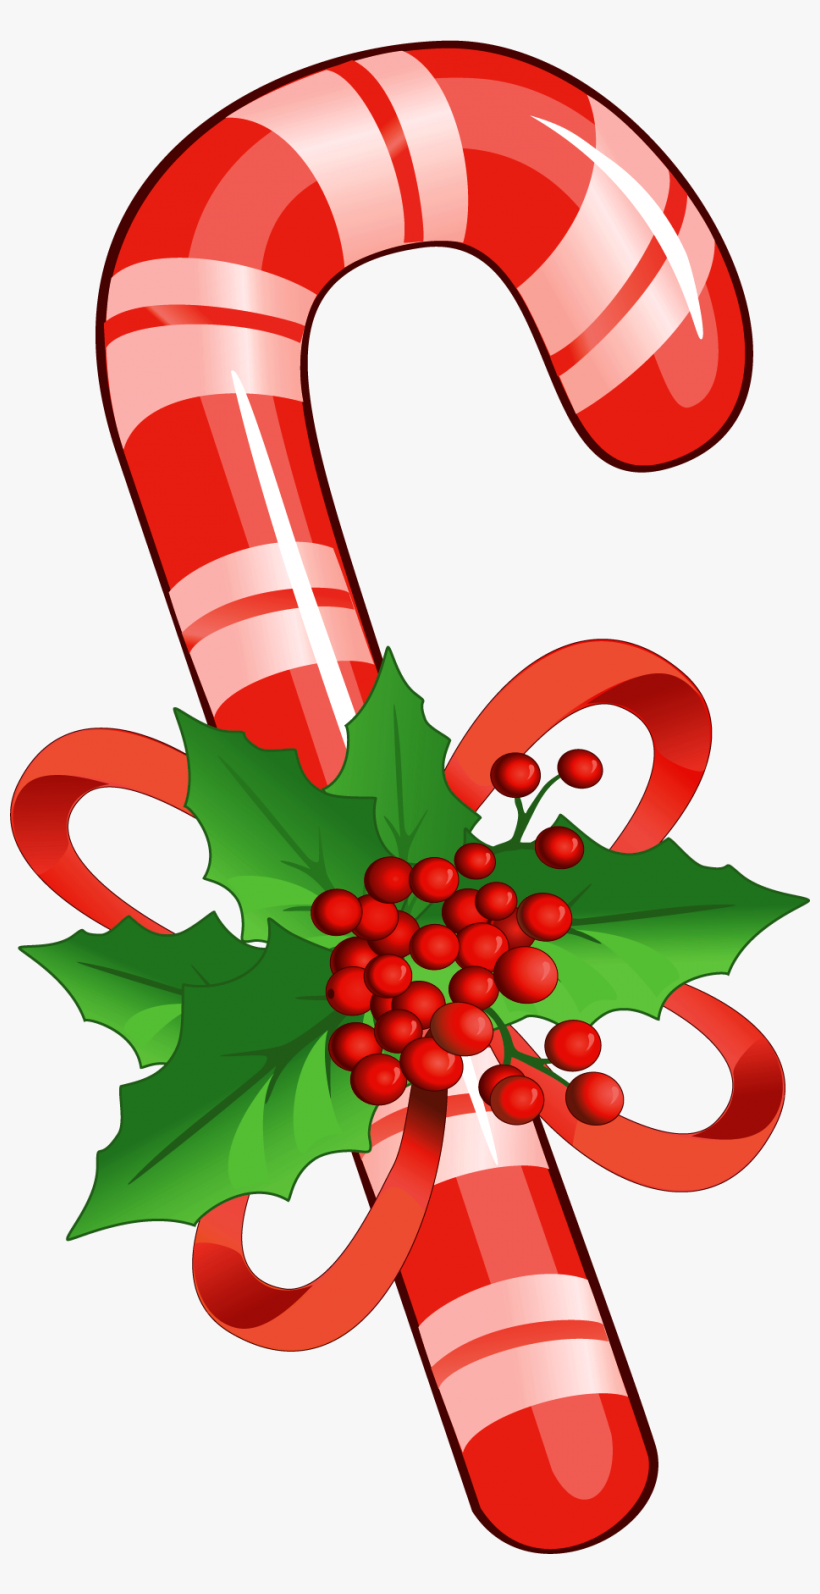 Candy Cane With Mistletoe Png Clipart Yopriceville - Candy Cane Clipart Png, transparent png #5496